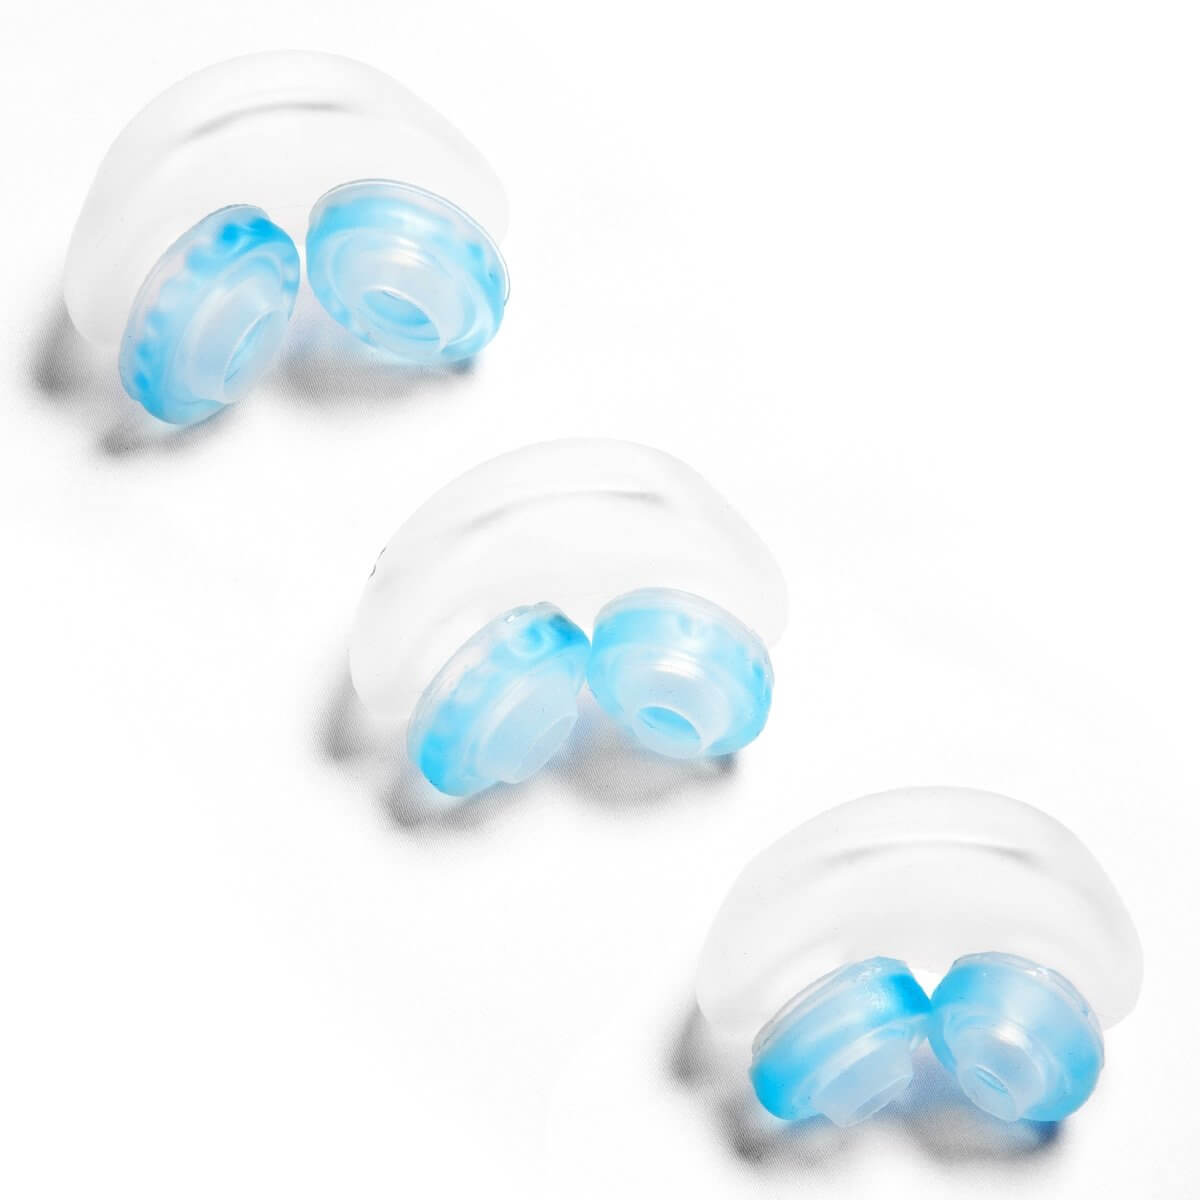 Nuance Gel Nasal Pillow Cushion Seal By Philips Respironics